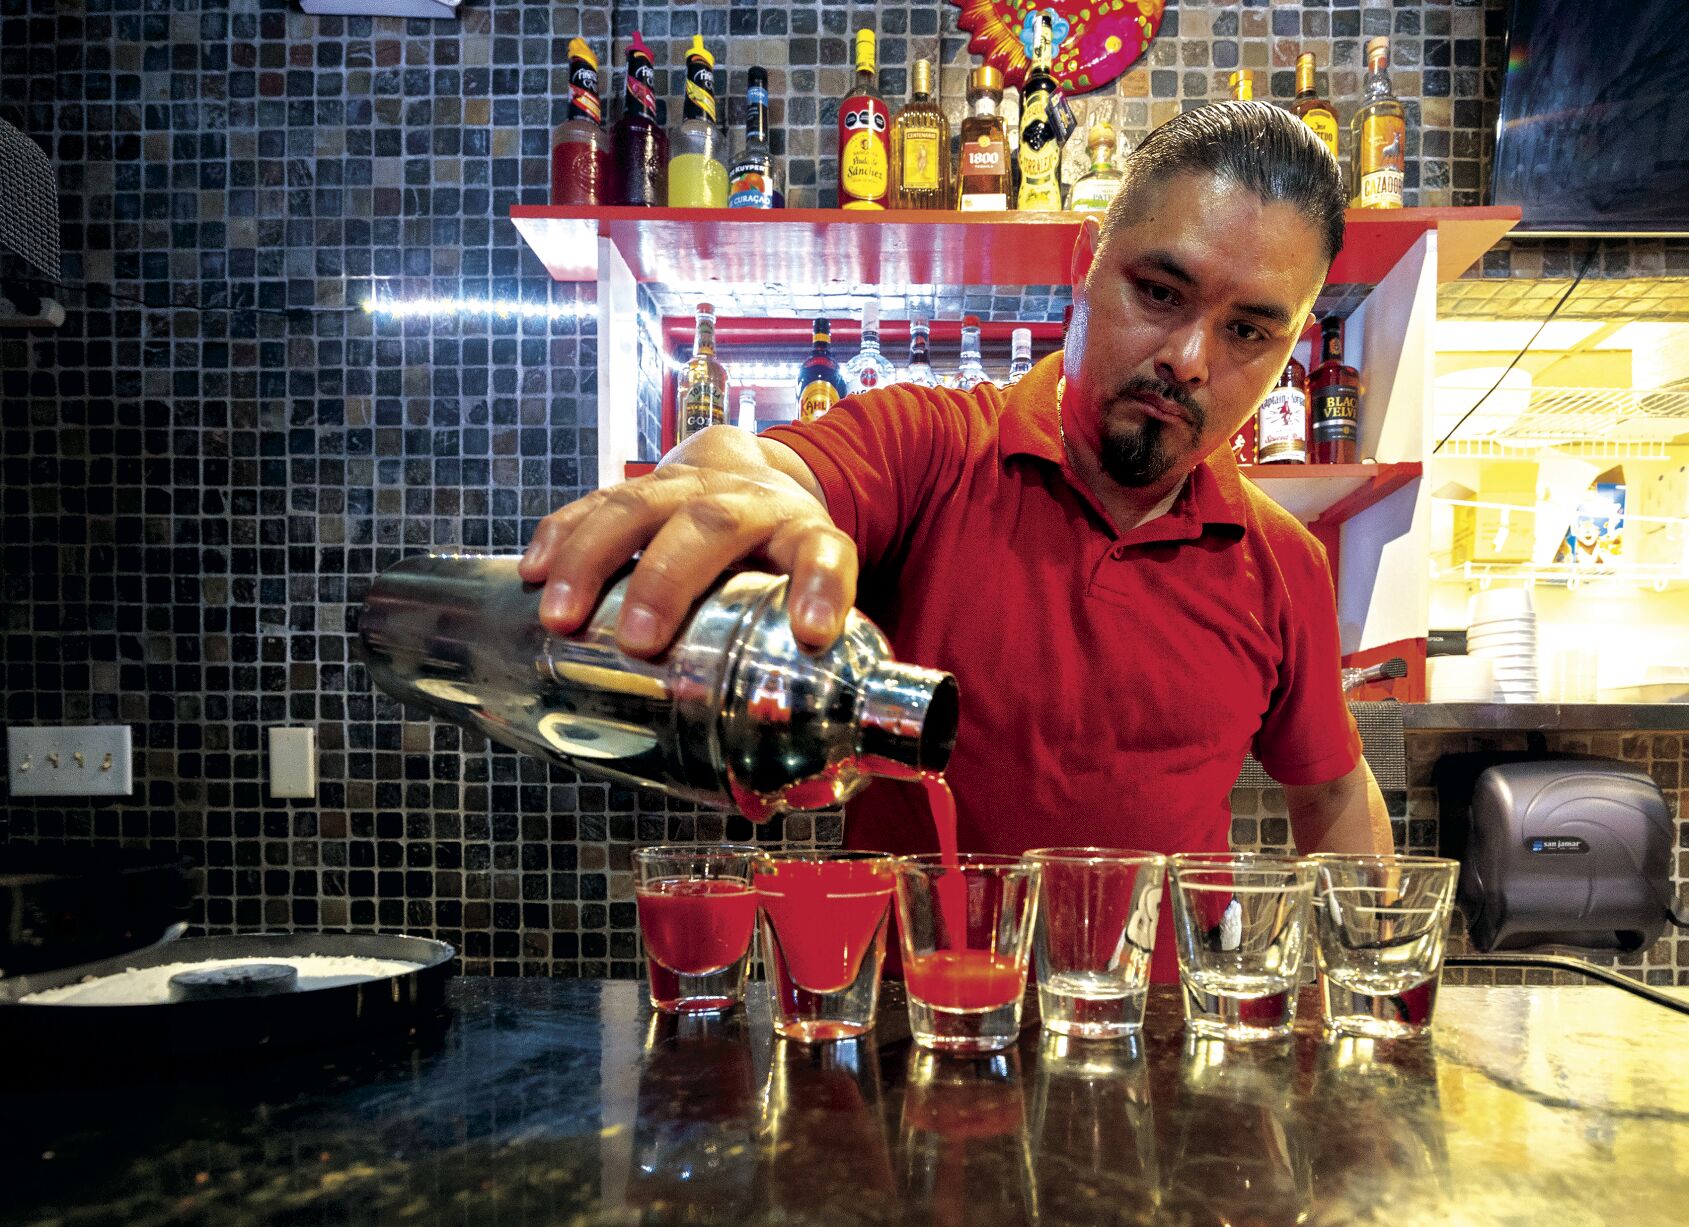 Manager Carlos Zapo pours shots at Lalo